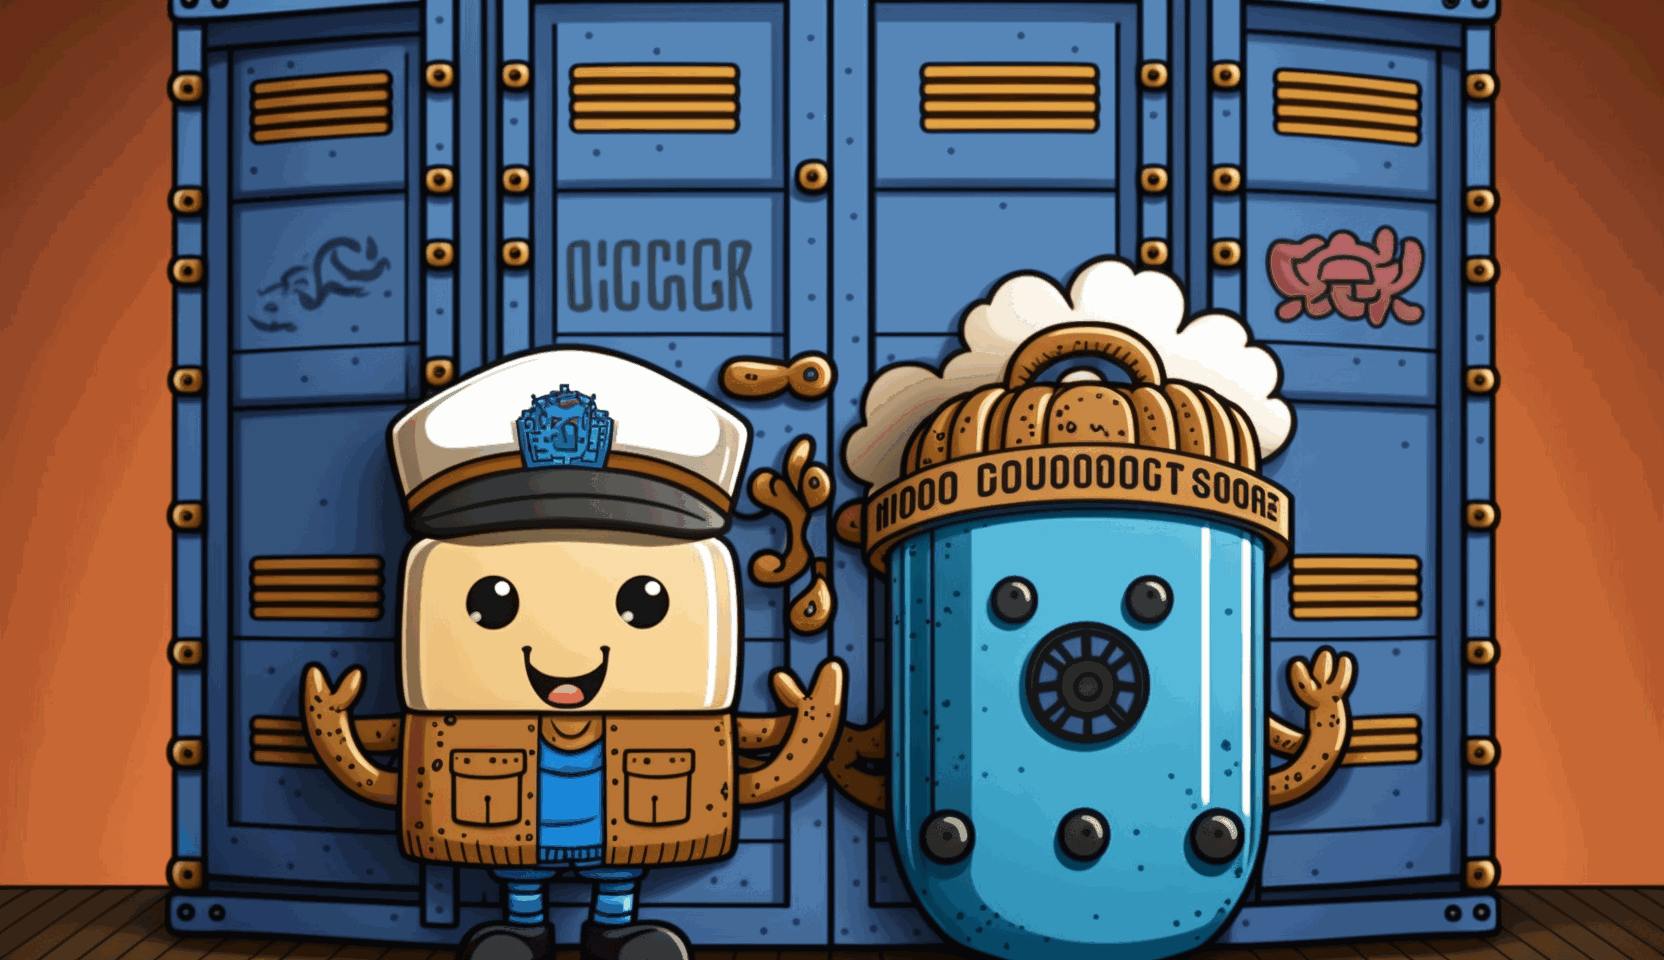 A cartoon docker container and a cartoon kubernetes pod holding hands and standing on top of a locked safe. The background is a wall of computer code.